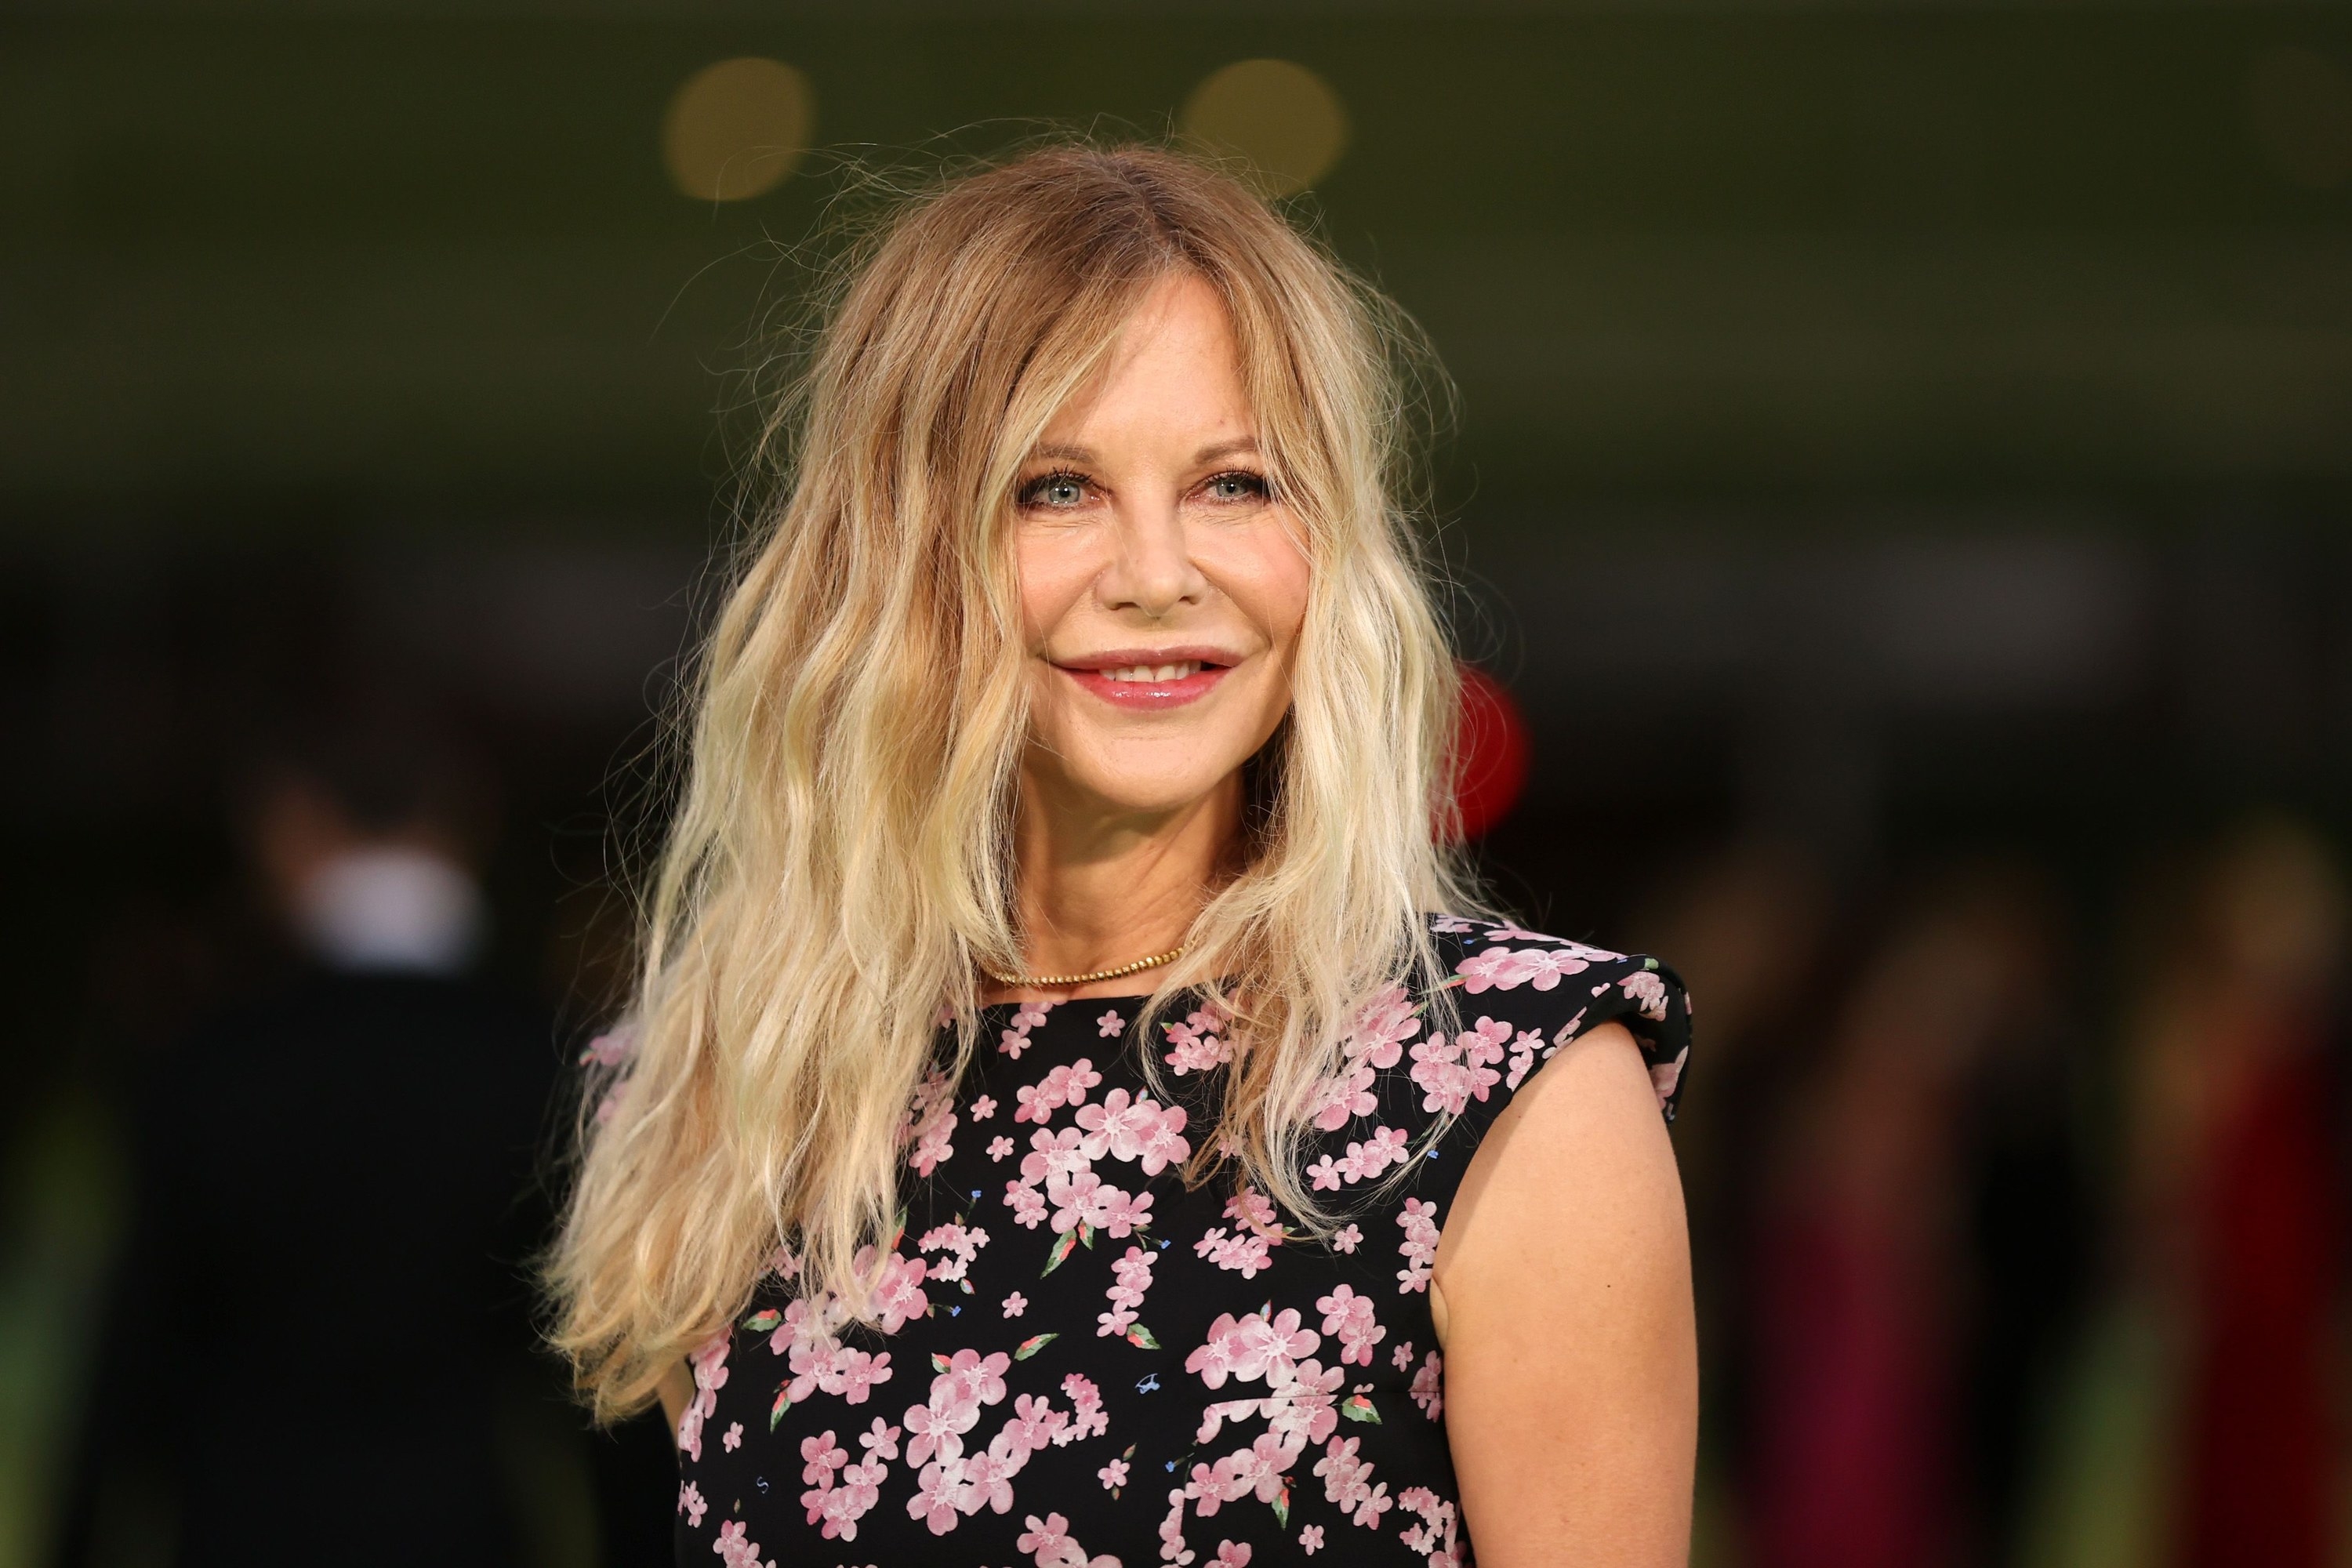 Meg Ryan attends The Academy Museum of Motion Pictures Opening Gala at The Academy Museum of Motion Pictures